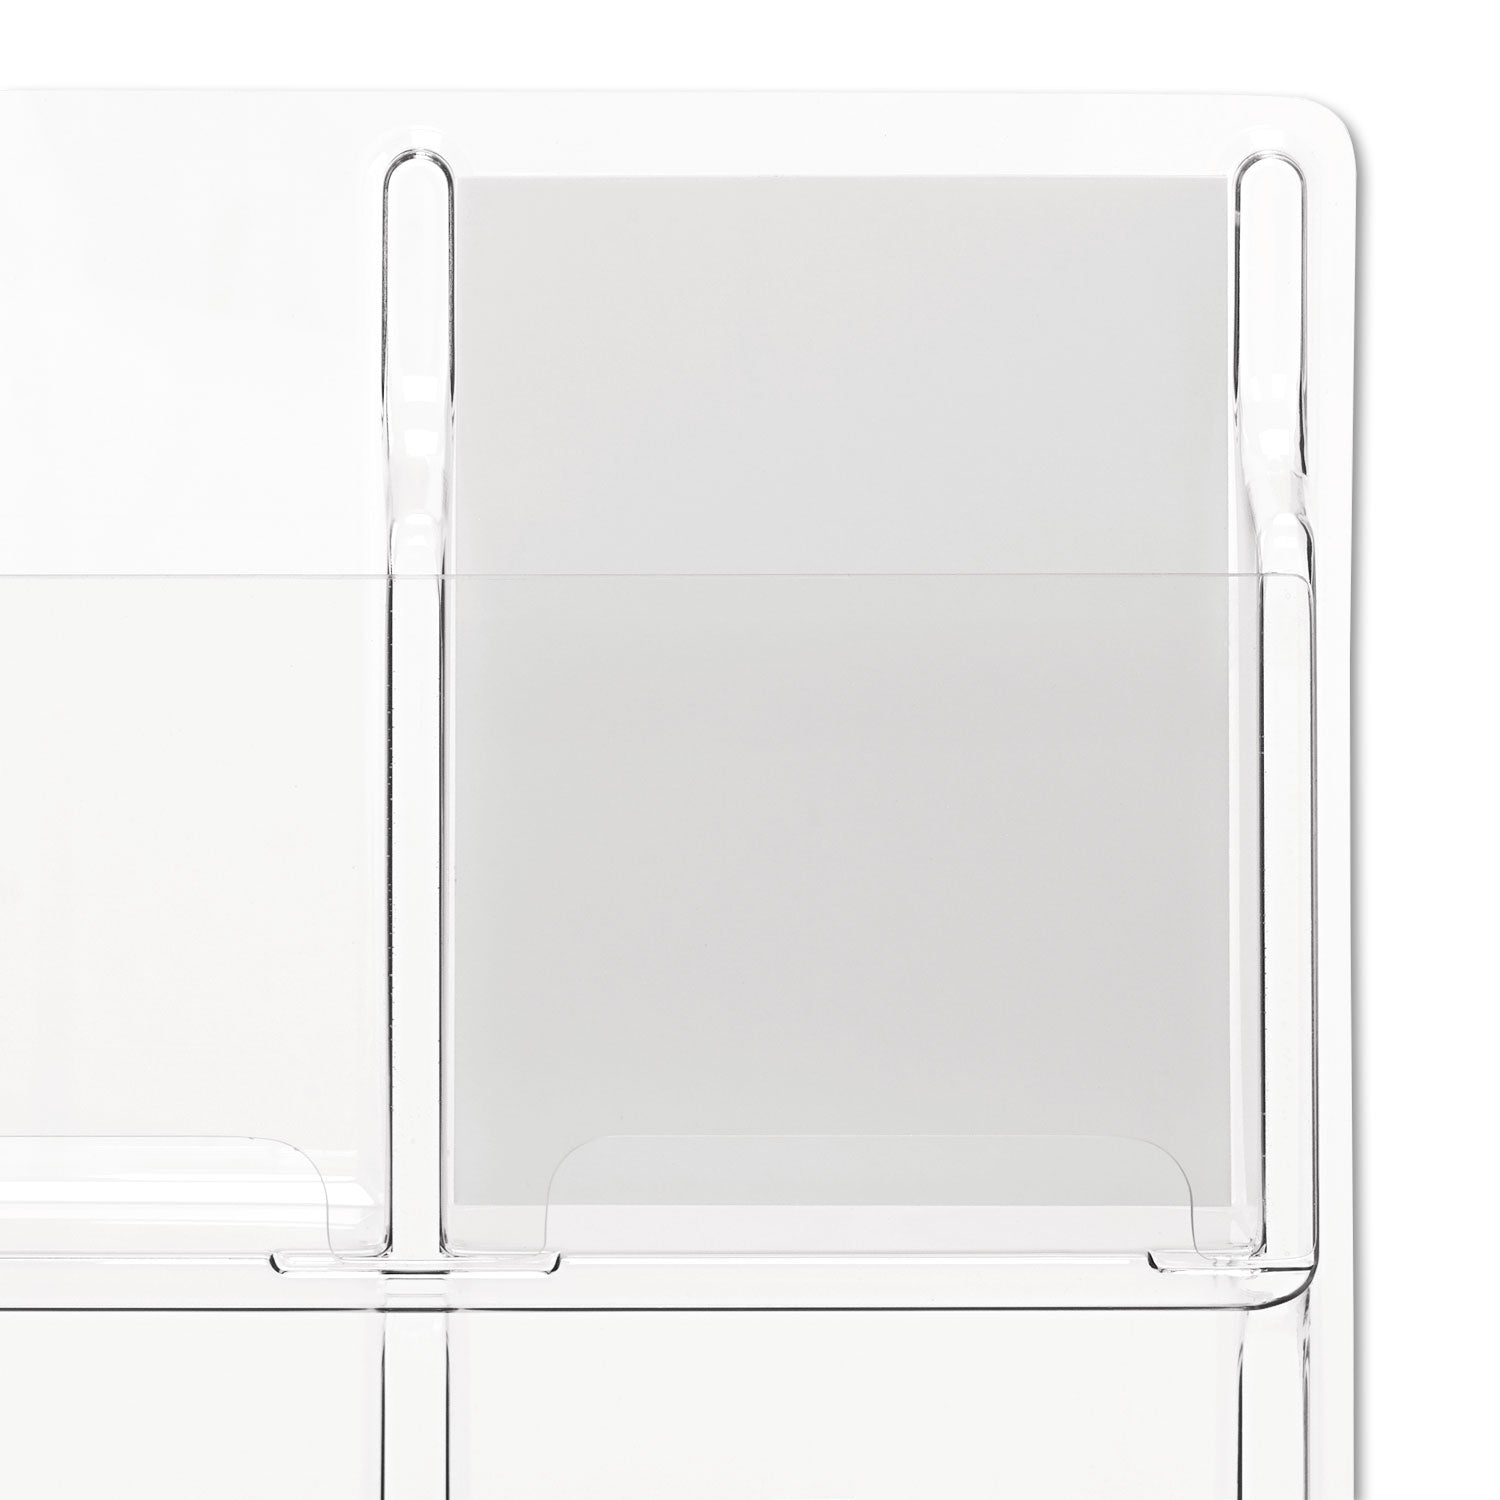 Reveal Clear Literature Displays, 9 Compartments, 30w x 2d x 36.75h, Clear - 